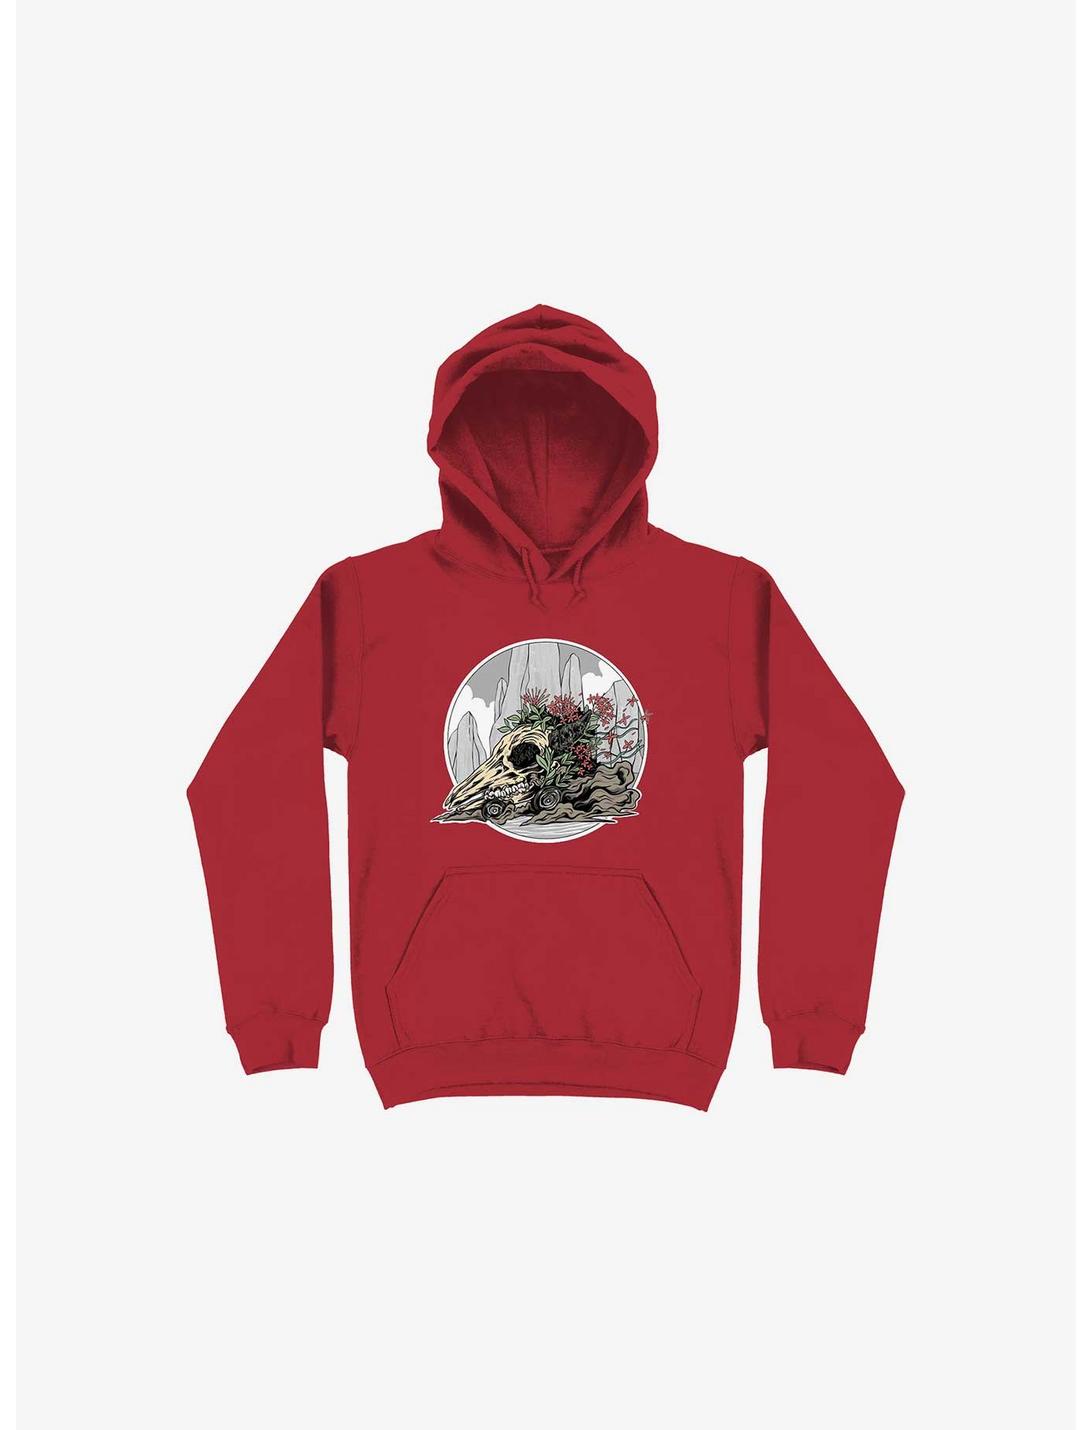 Race The Time Skull Red Hoodie, RED, hi-res